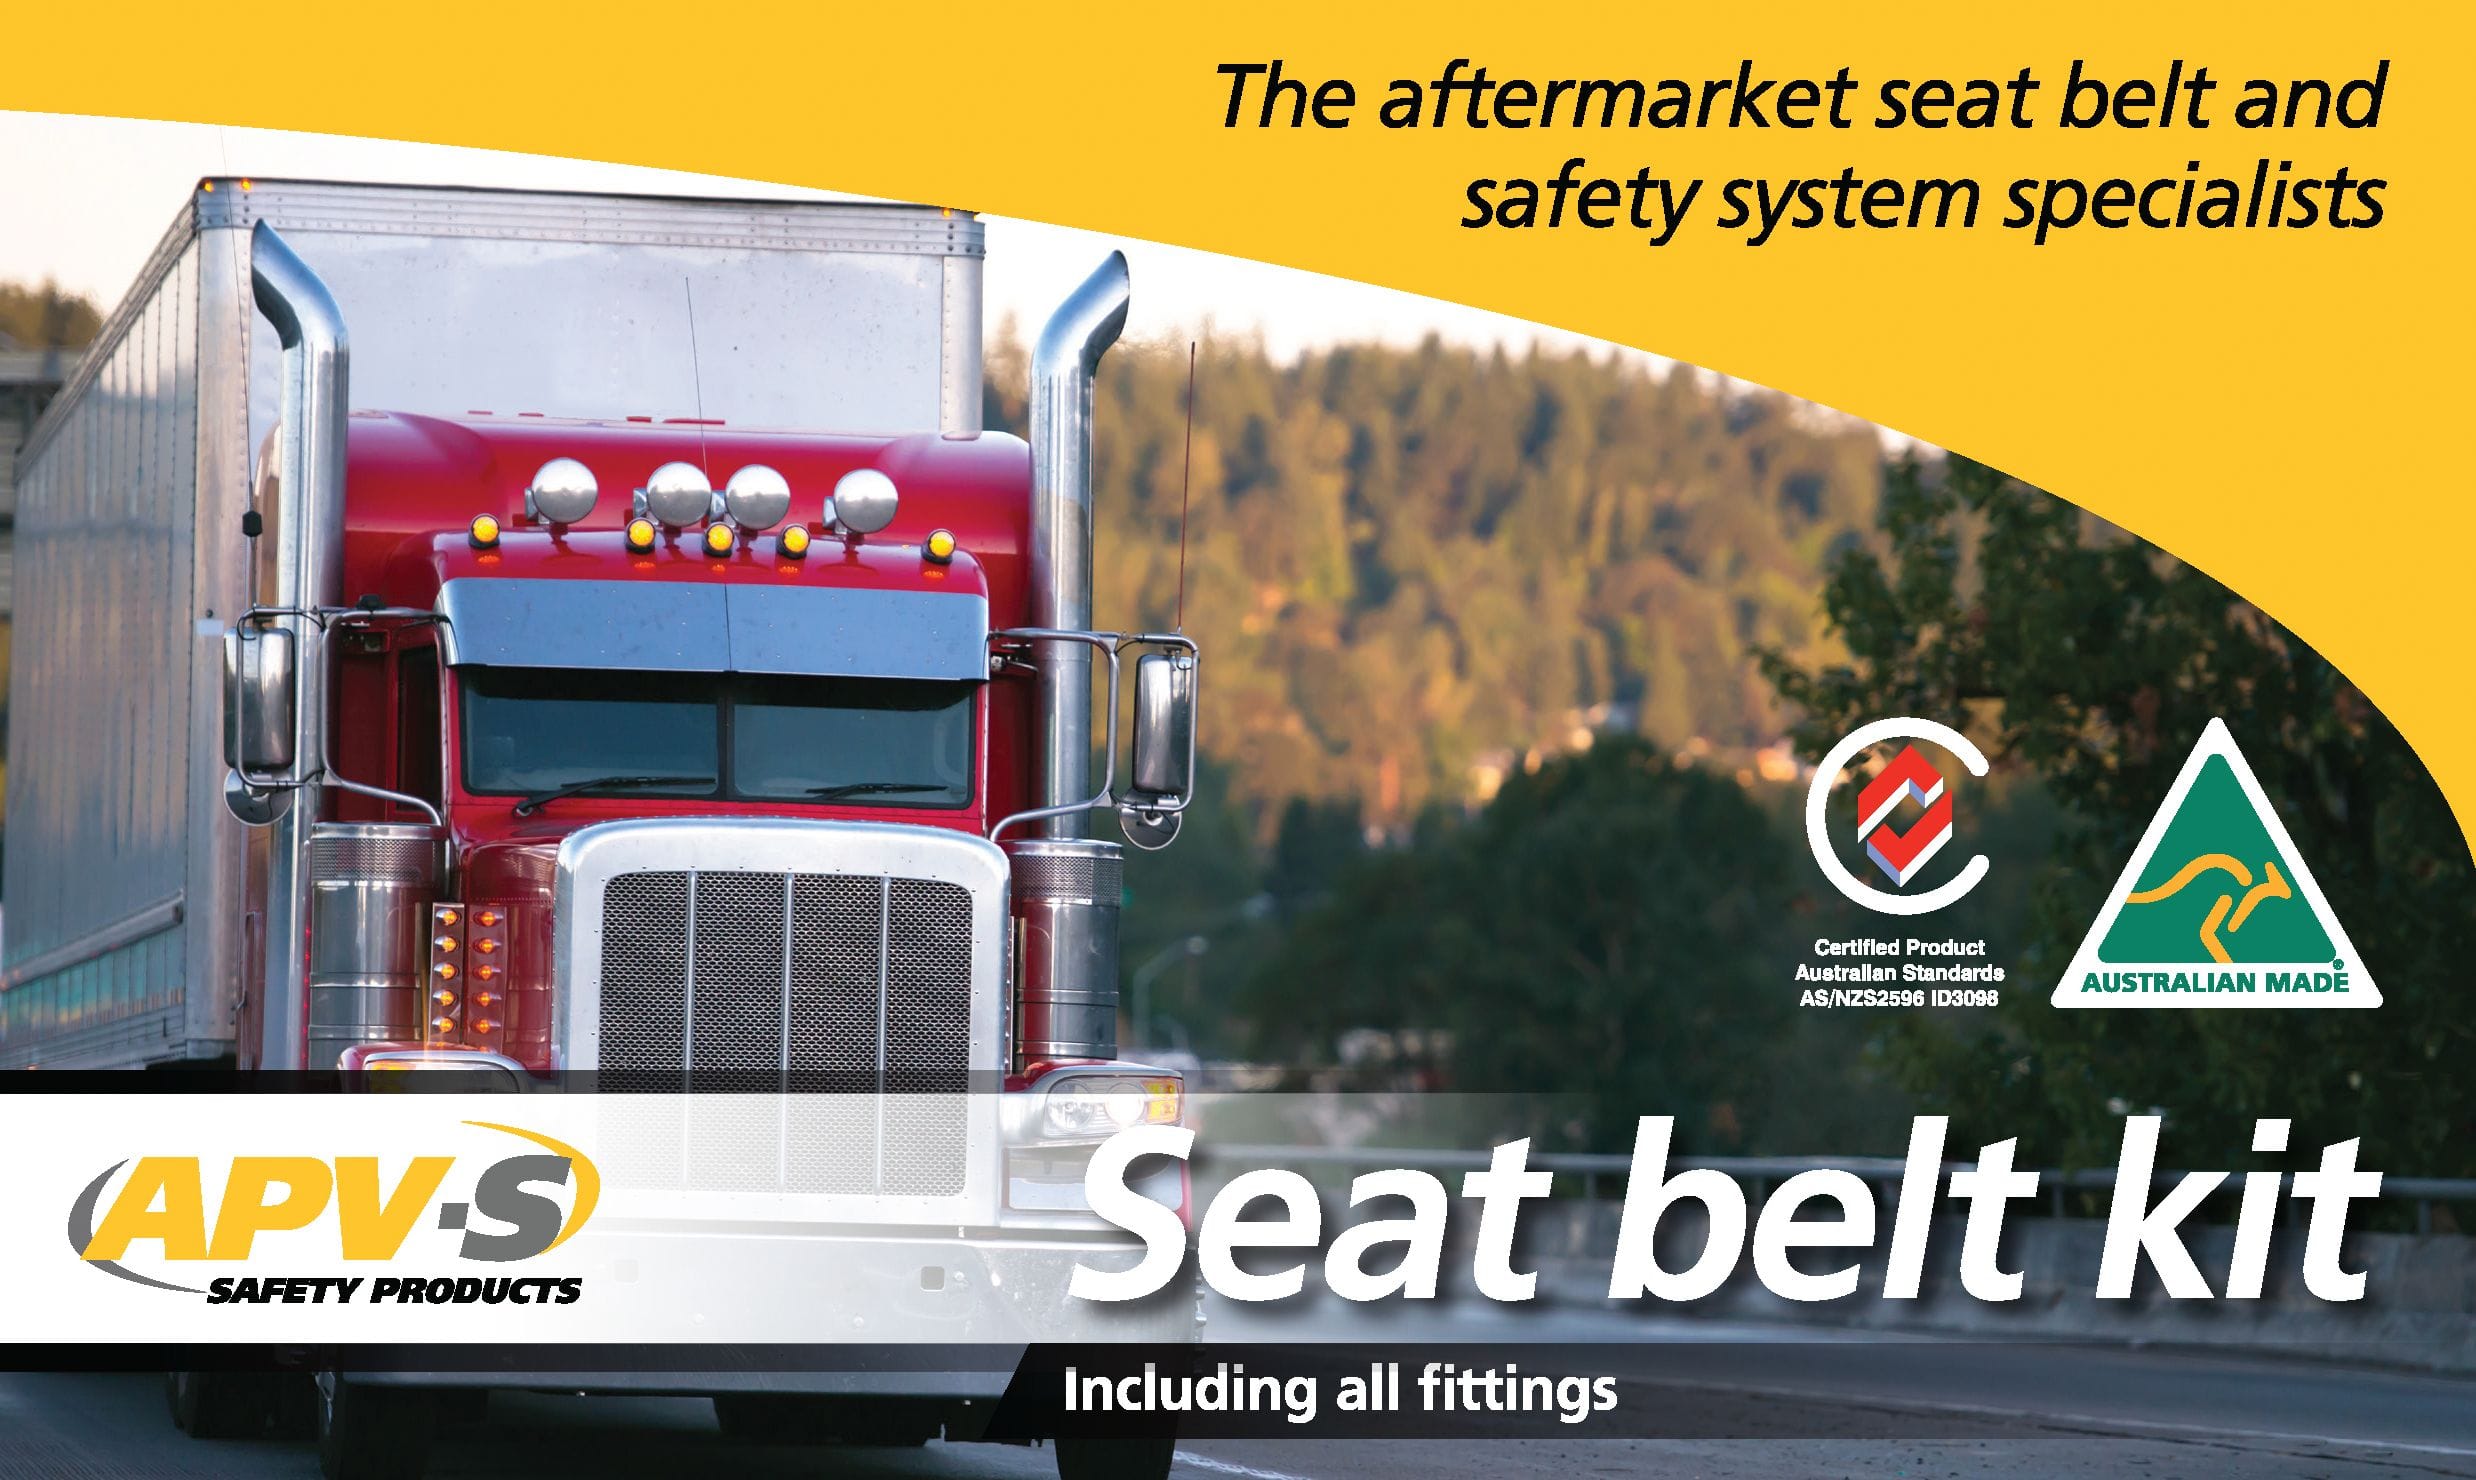 Seat belt kits for Trucks and Heavy Vehicles